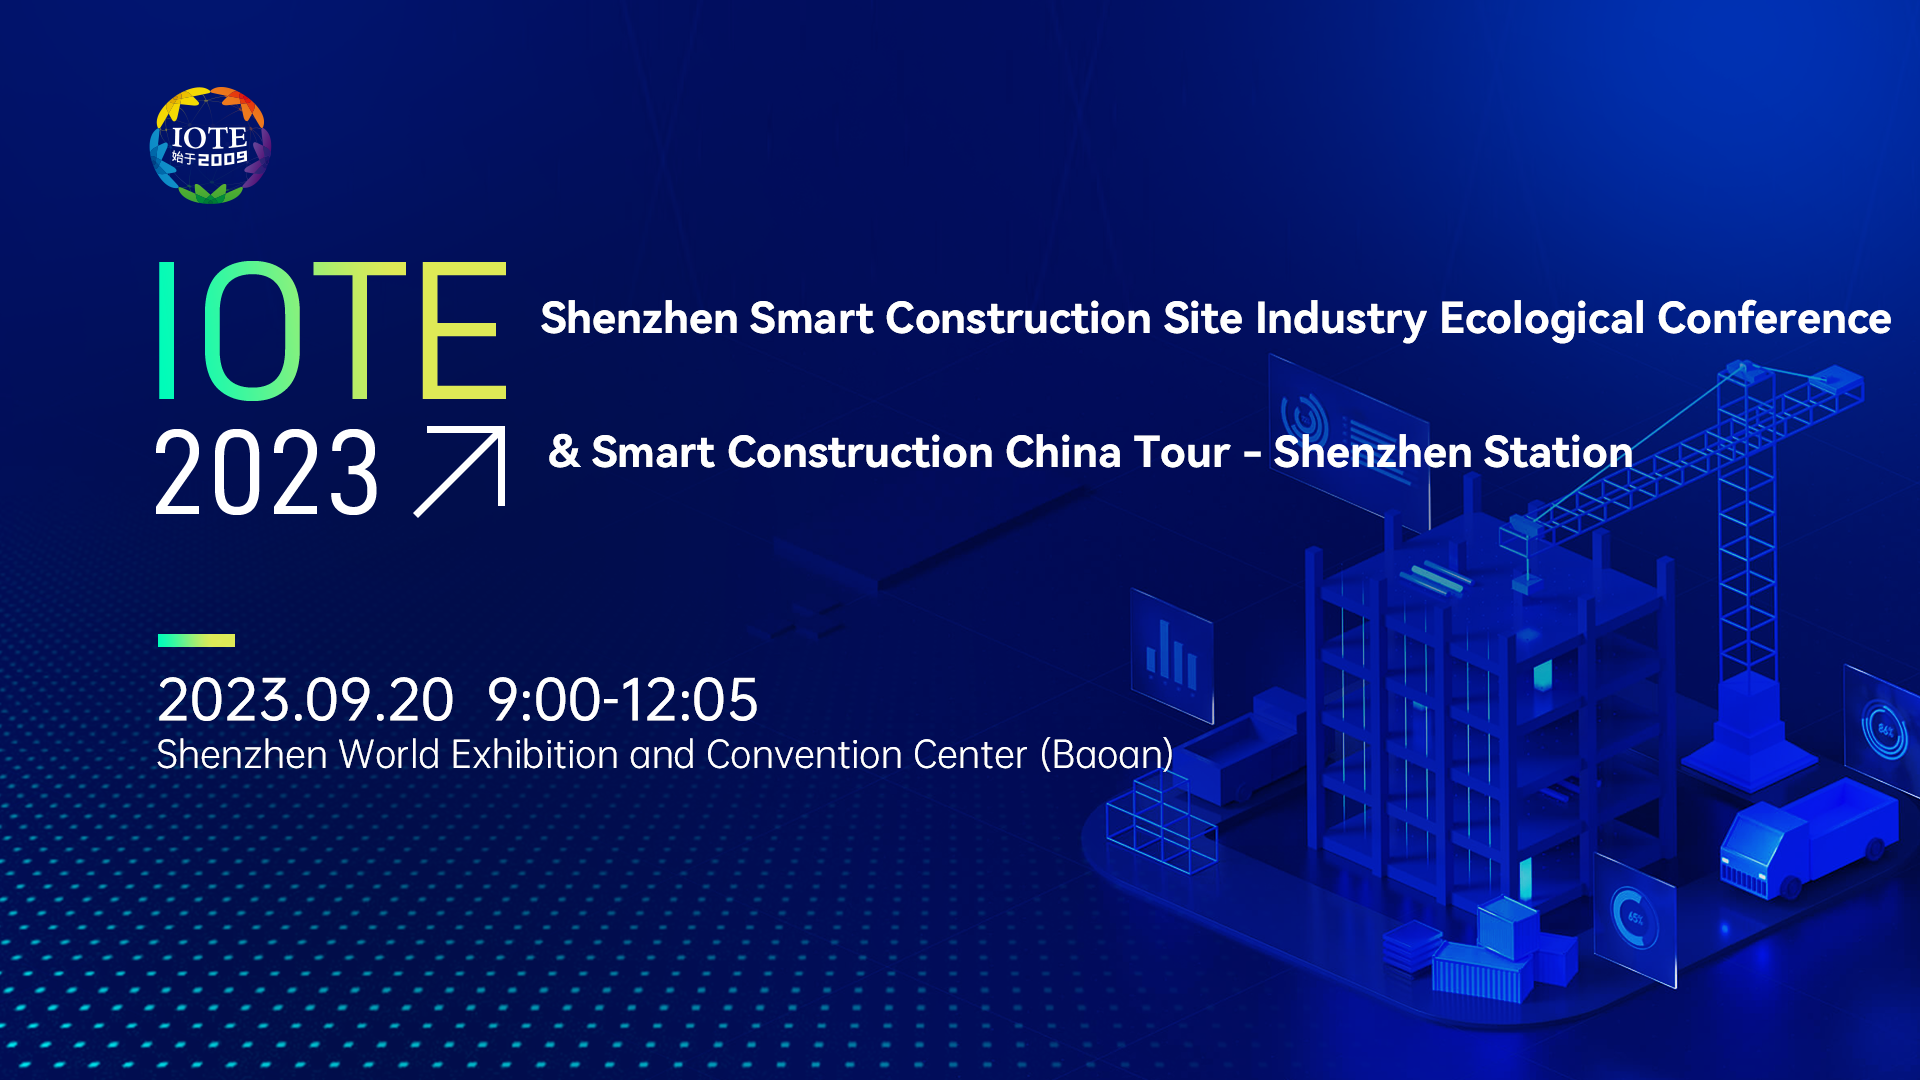 IOTE 2023 Shenzhen | Smart Construction Site Industry Ecological Conference & Smart Construction China Tour (IOTE-IoT Expo China) 